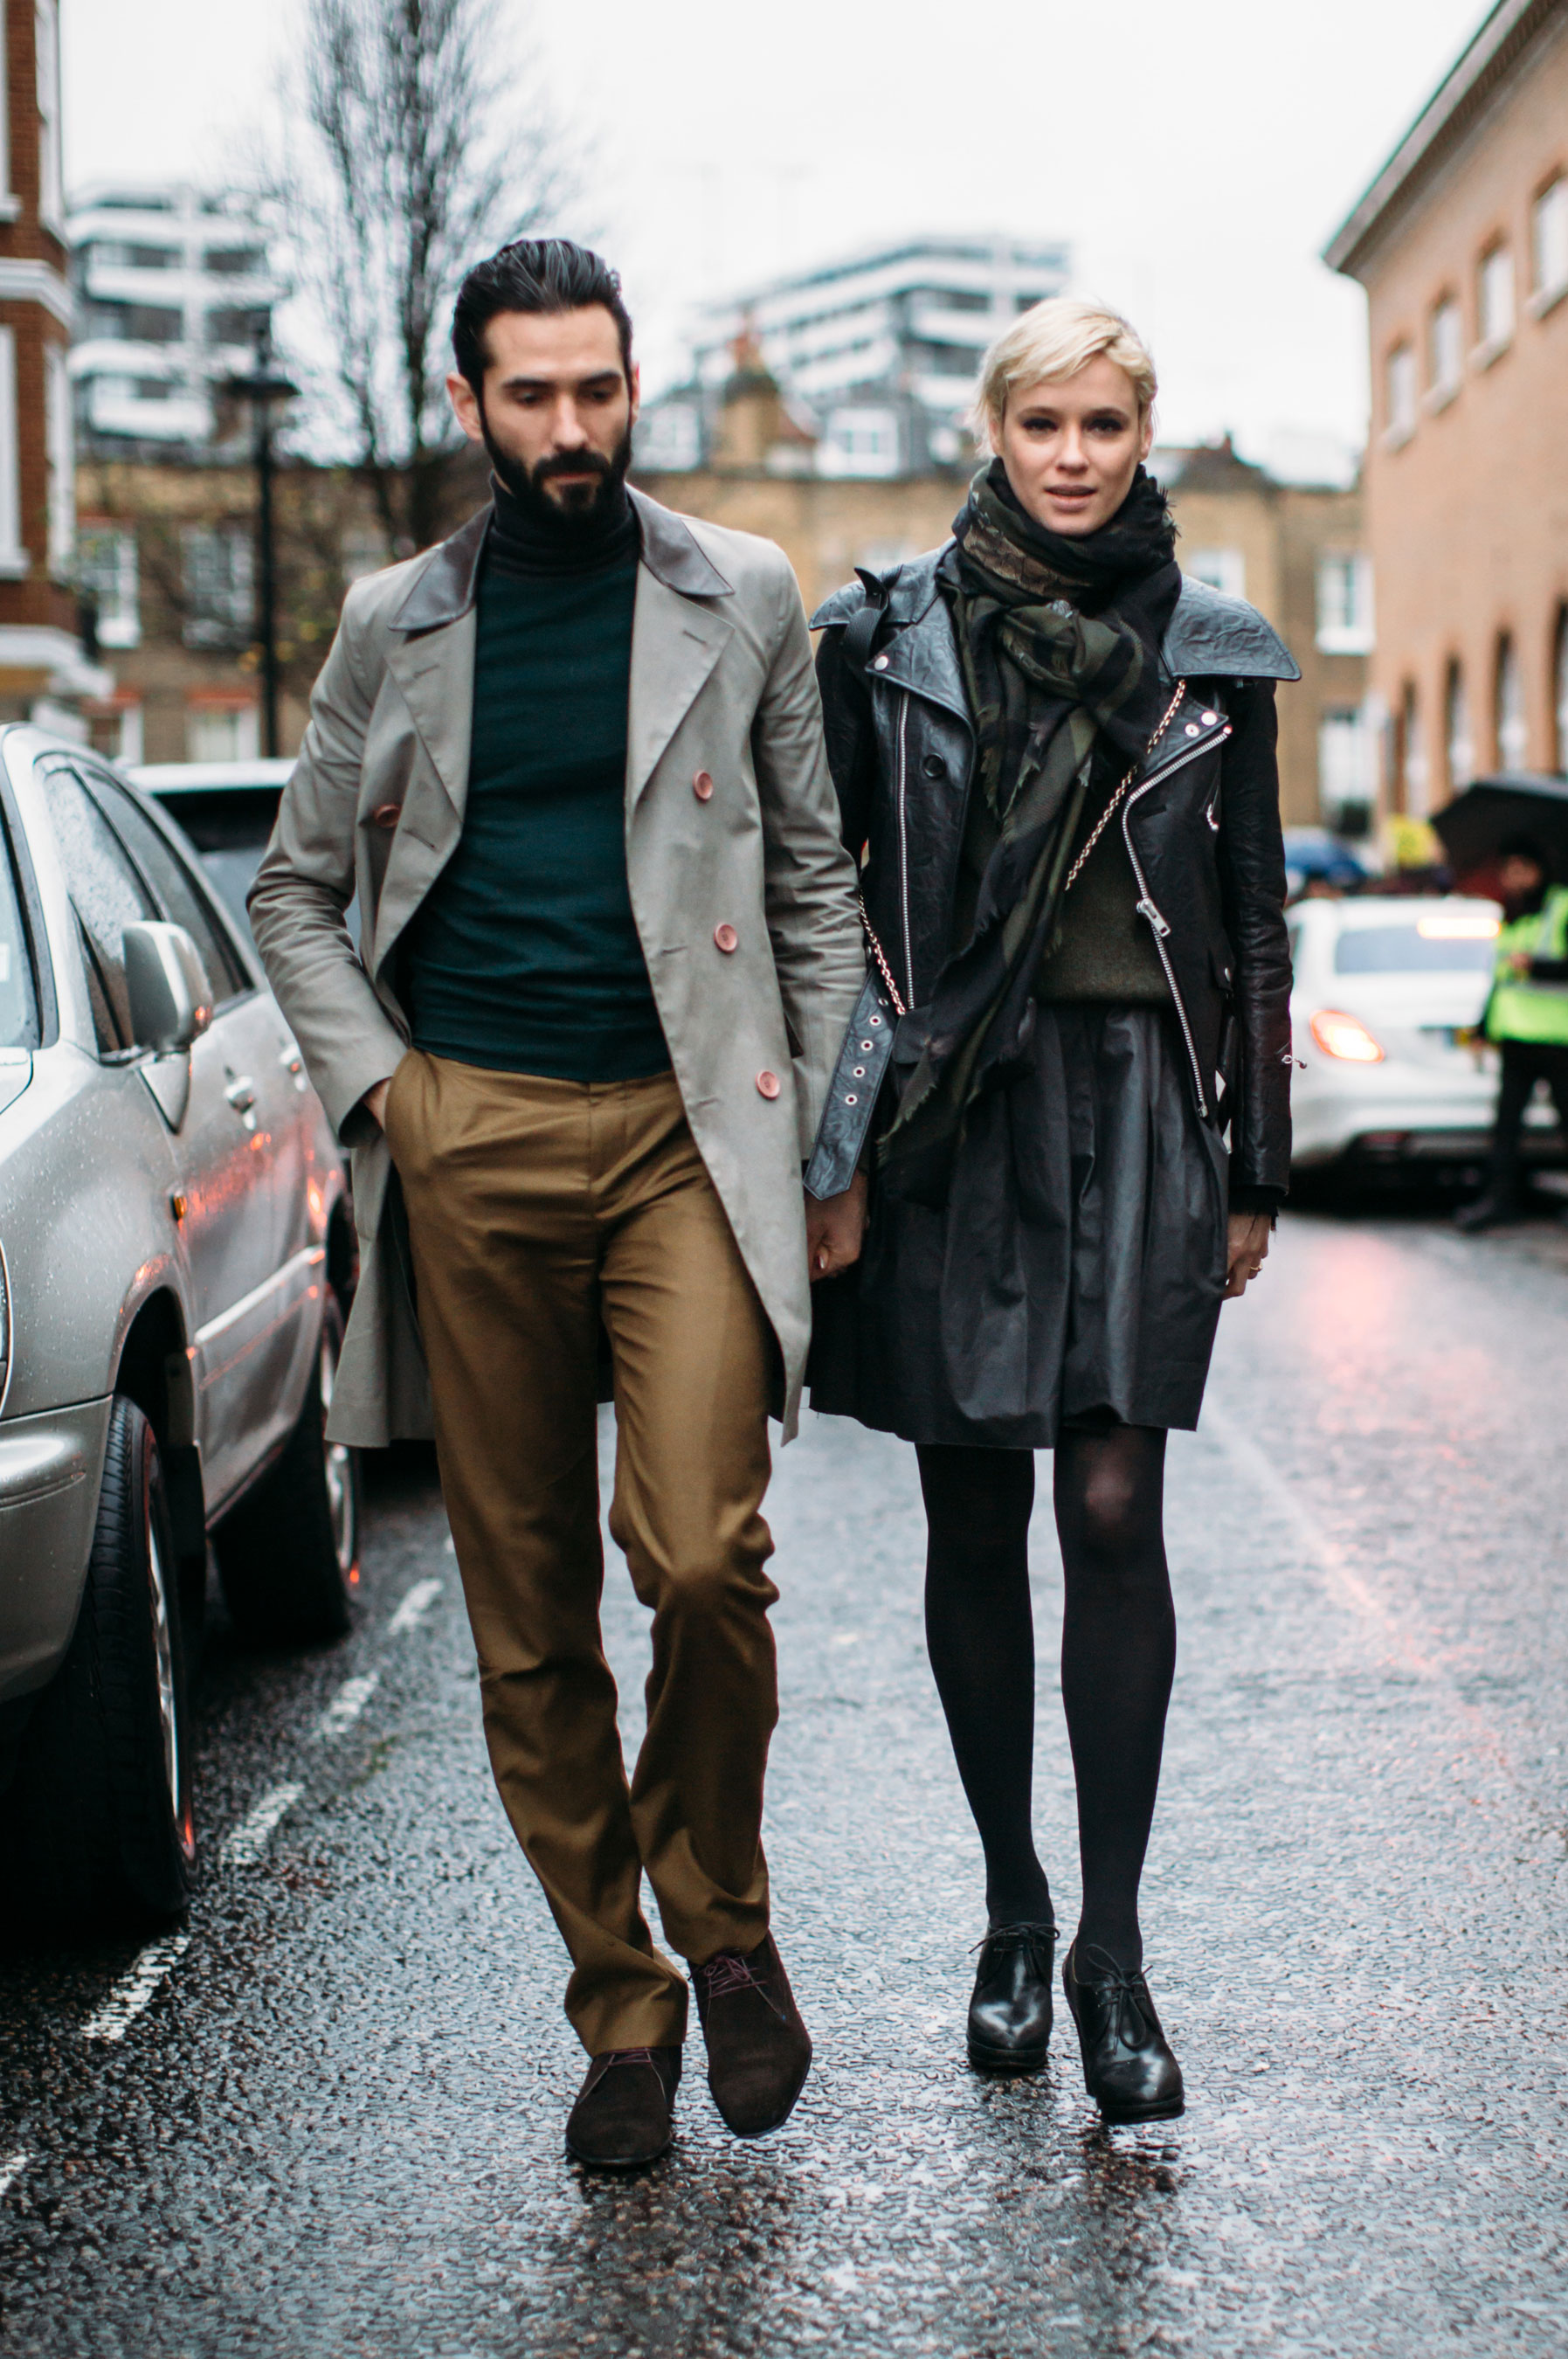 Street Style Couples - Blue is in Fashion this Year